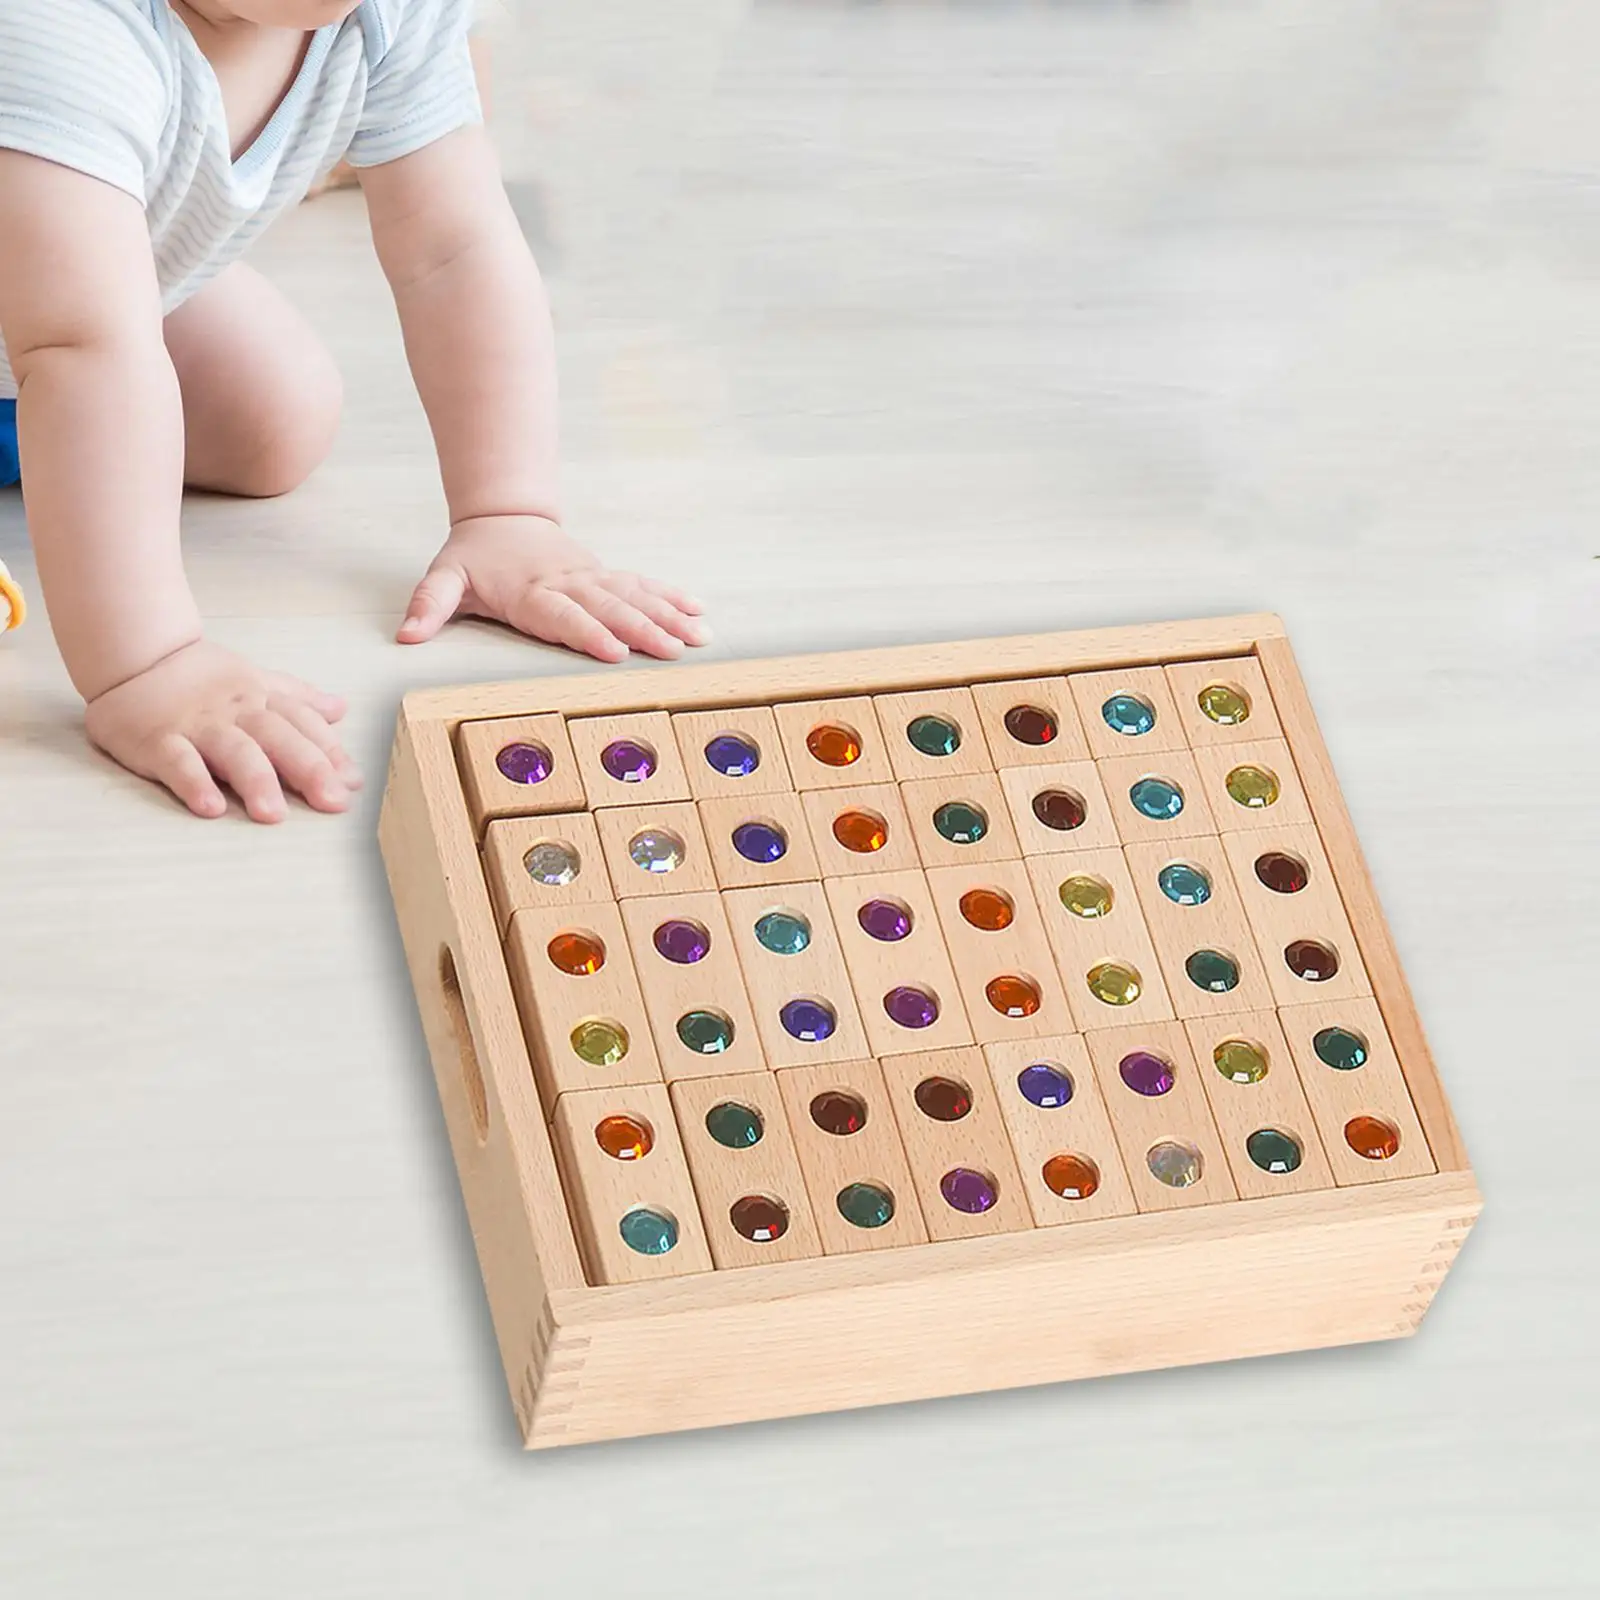 128x Wooden Stacking Blocks Teaching Aids Montessori Toys Acrylic Block Construction Toy for Preschool Toddlers Baby Children